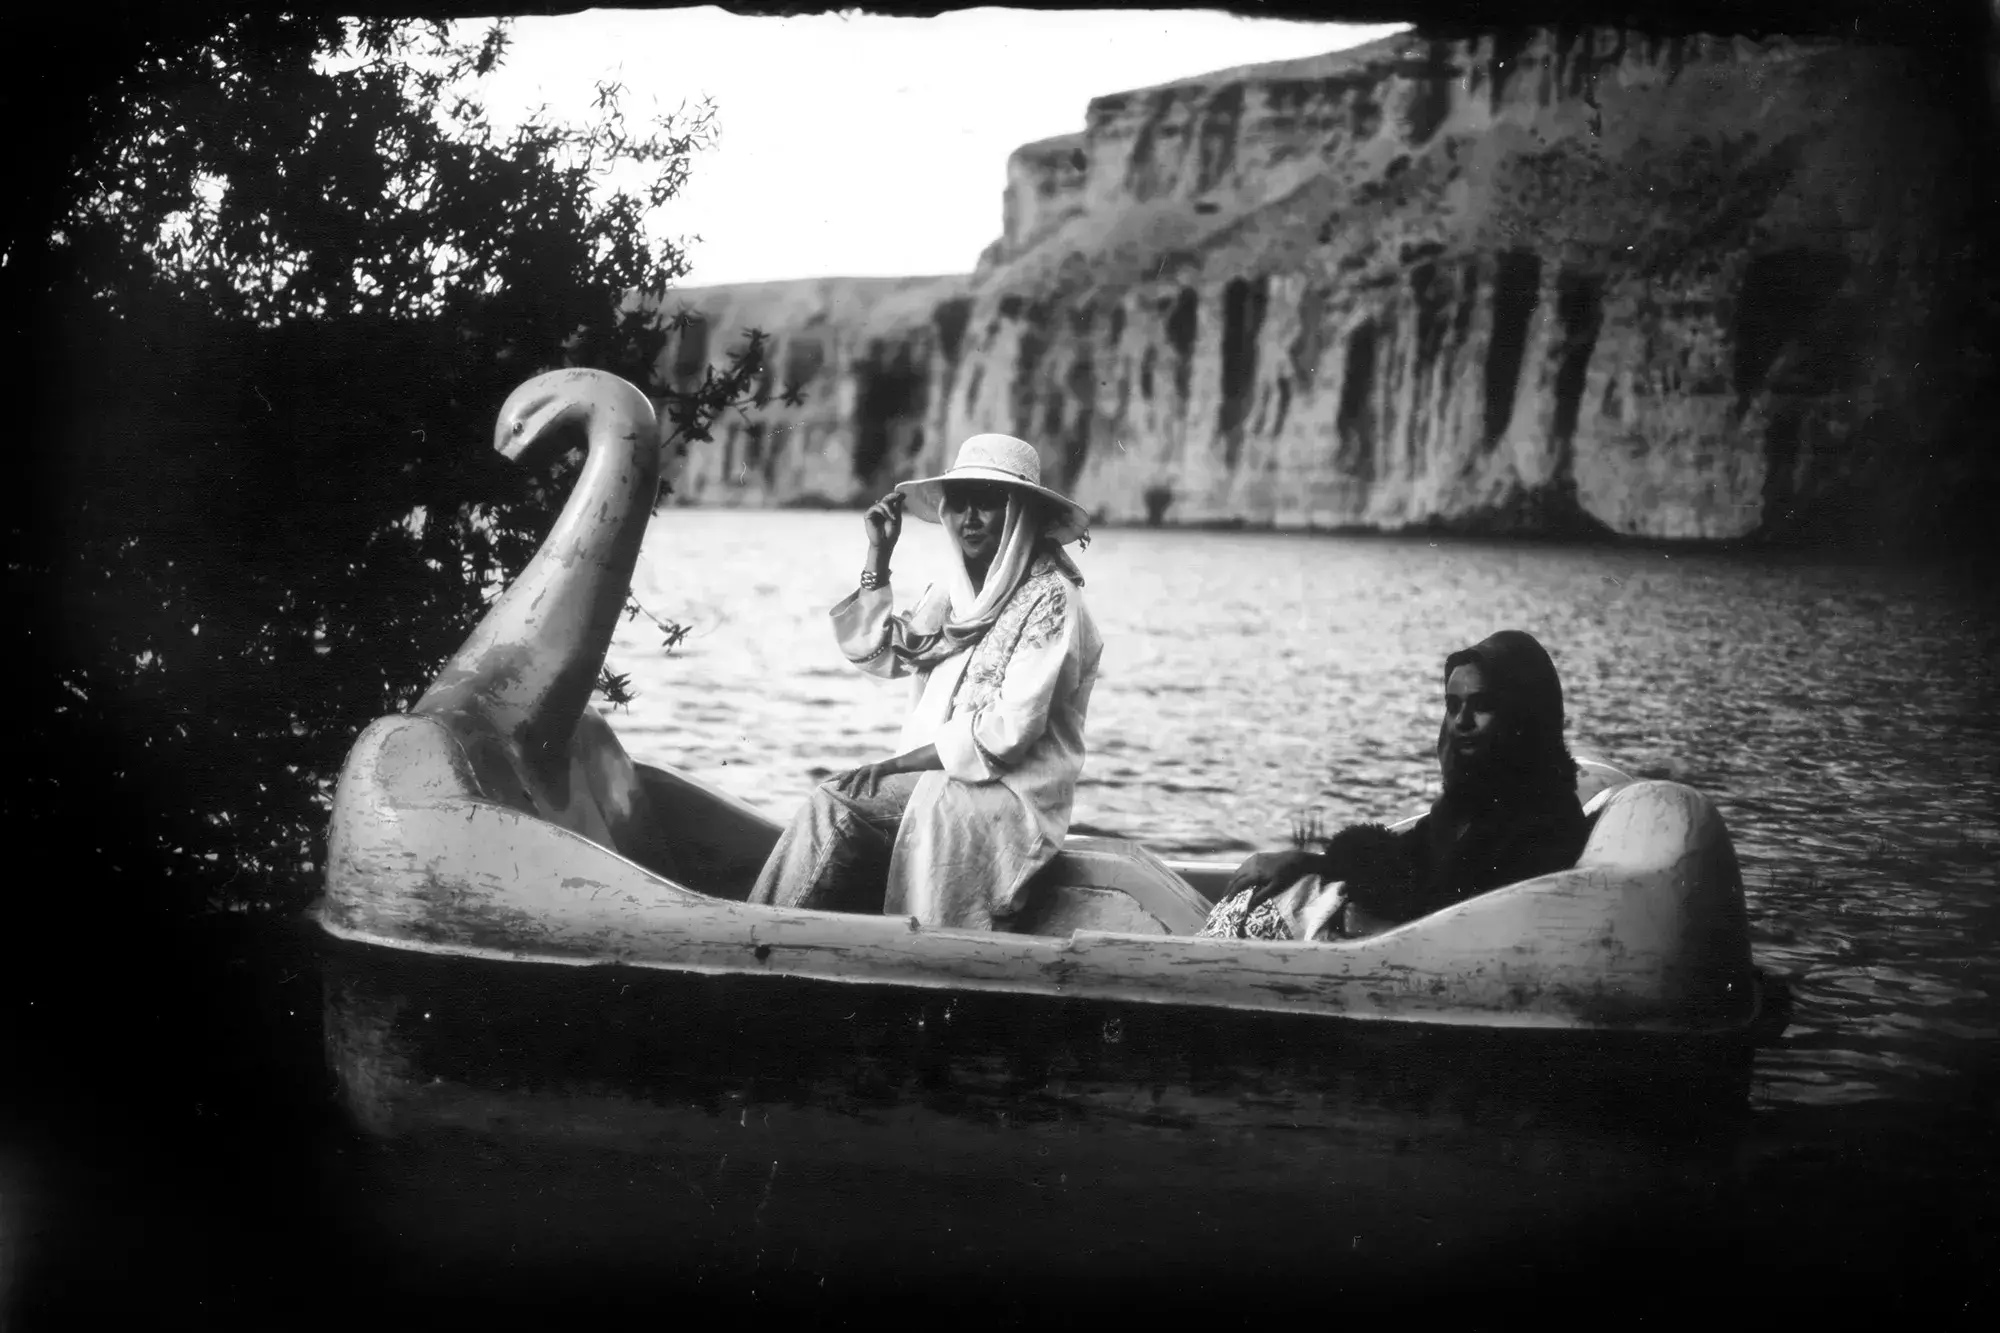 In a black and white photograph, two women sit in a swan boat. One woman is wearing a hat with a scarf. Cliffs are visible in the background.